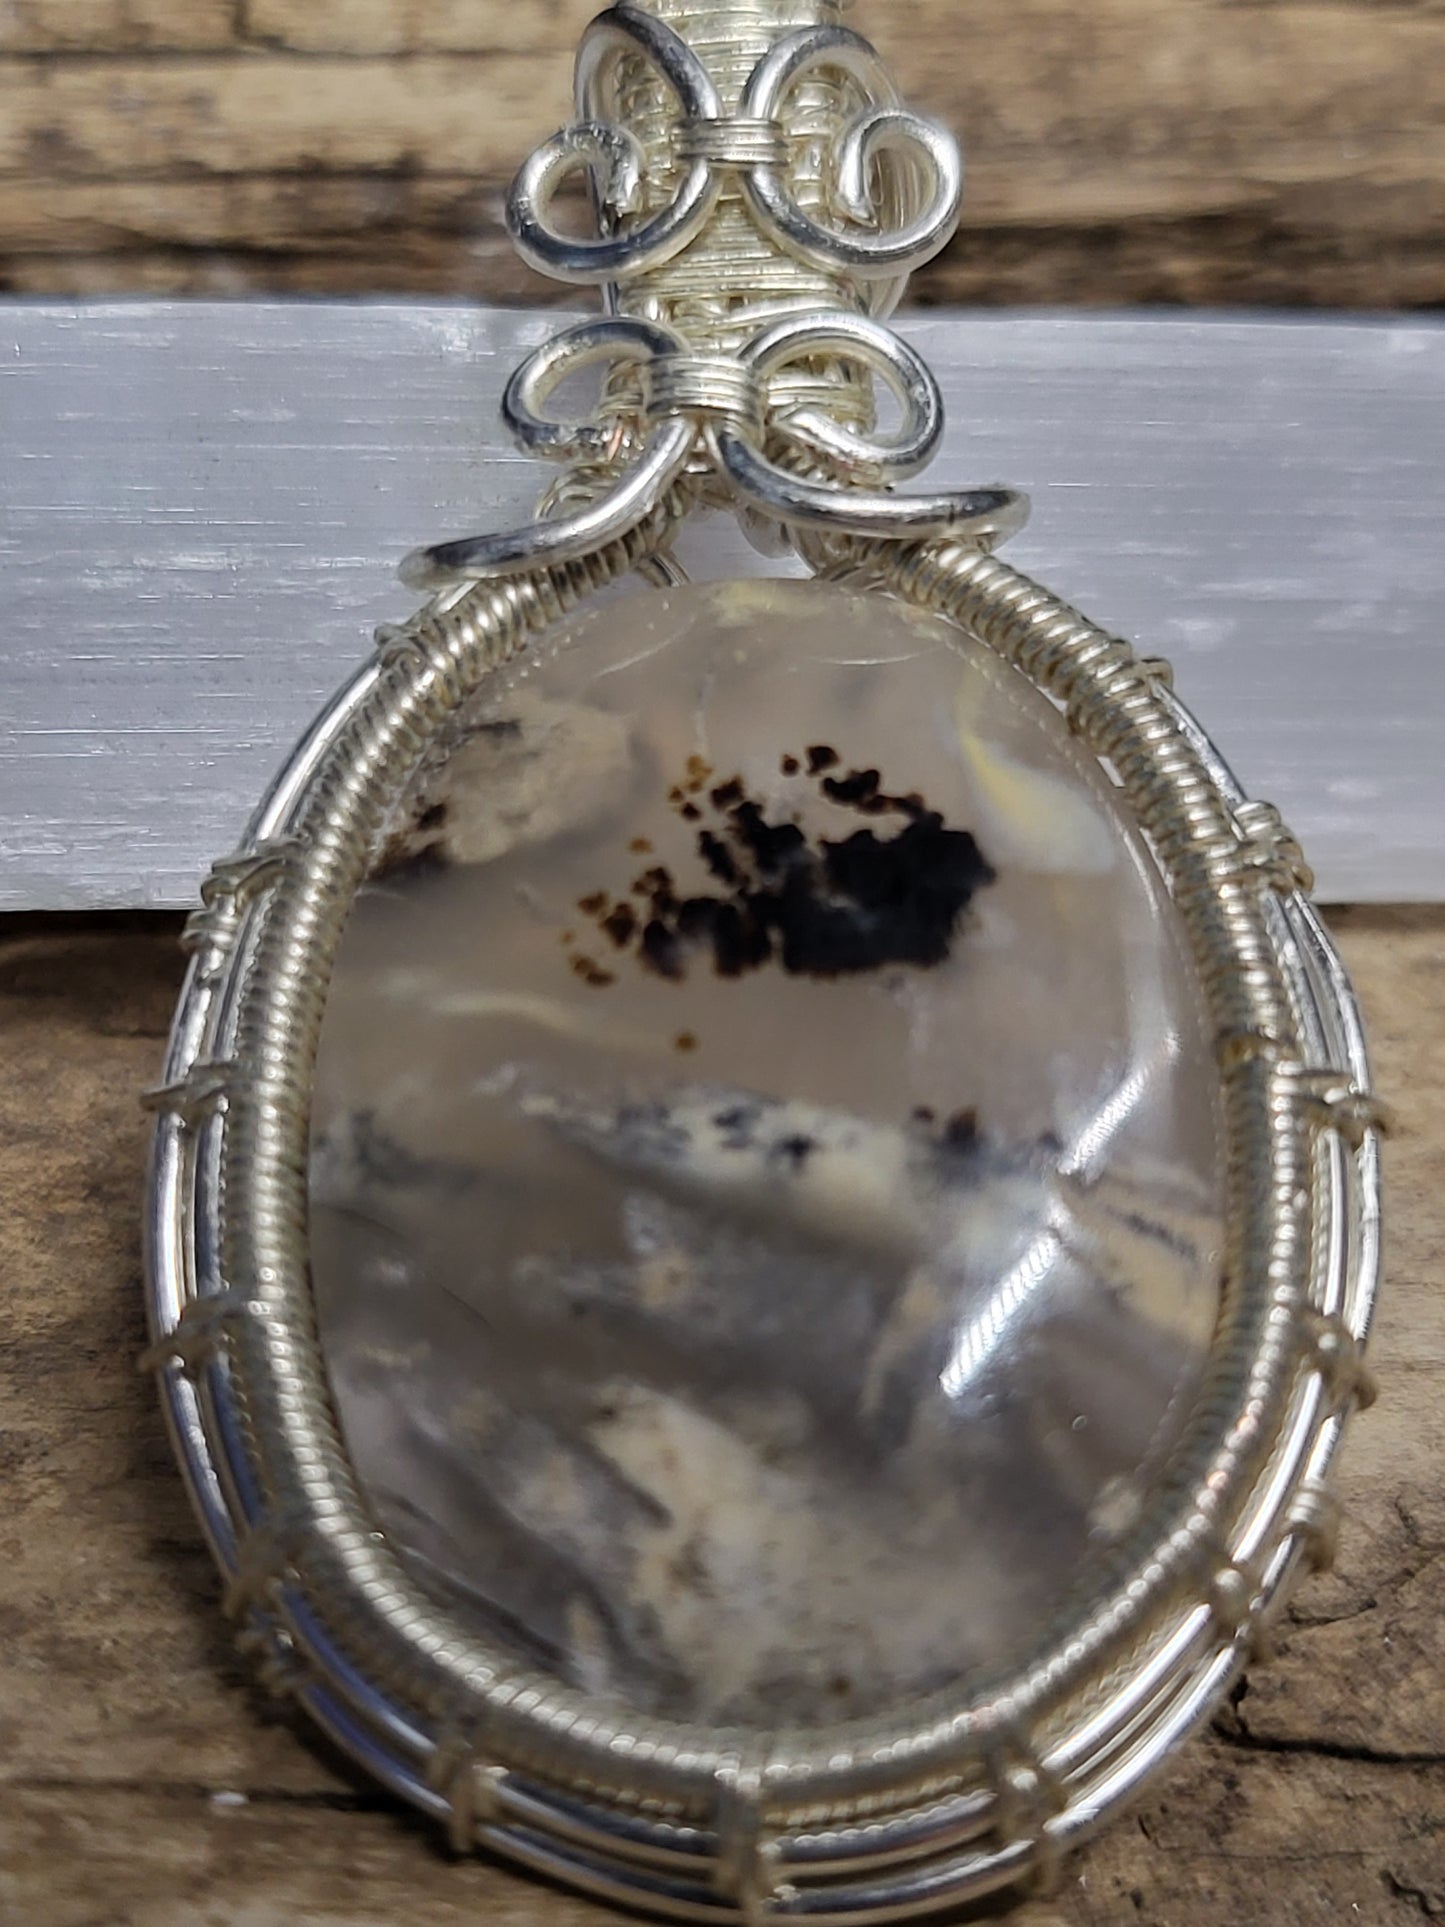 Moss agate and Silver Wire Wrapped Pendant Necklace